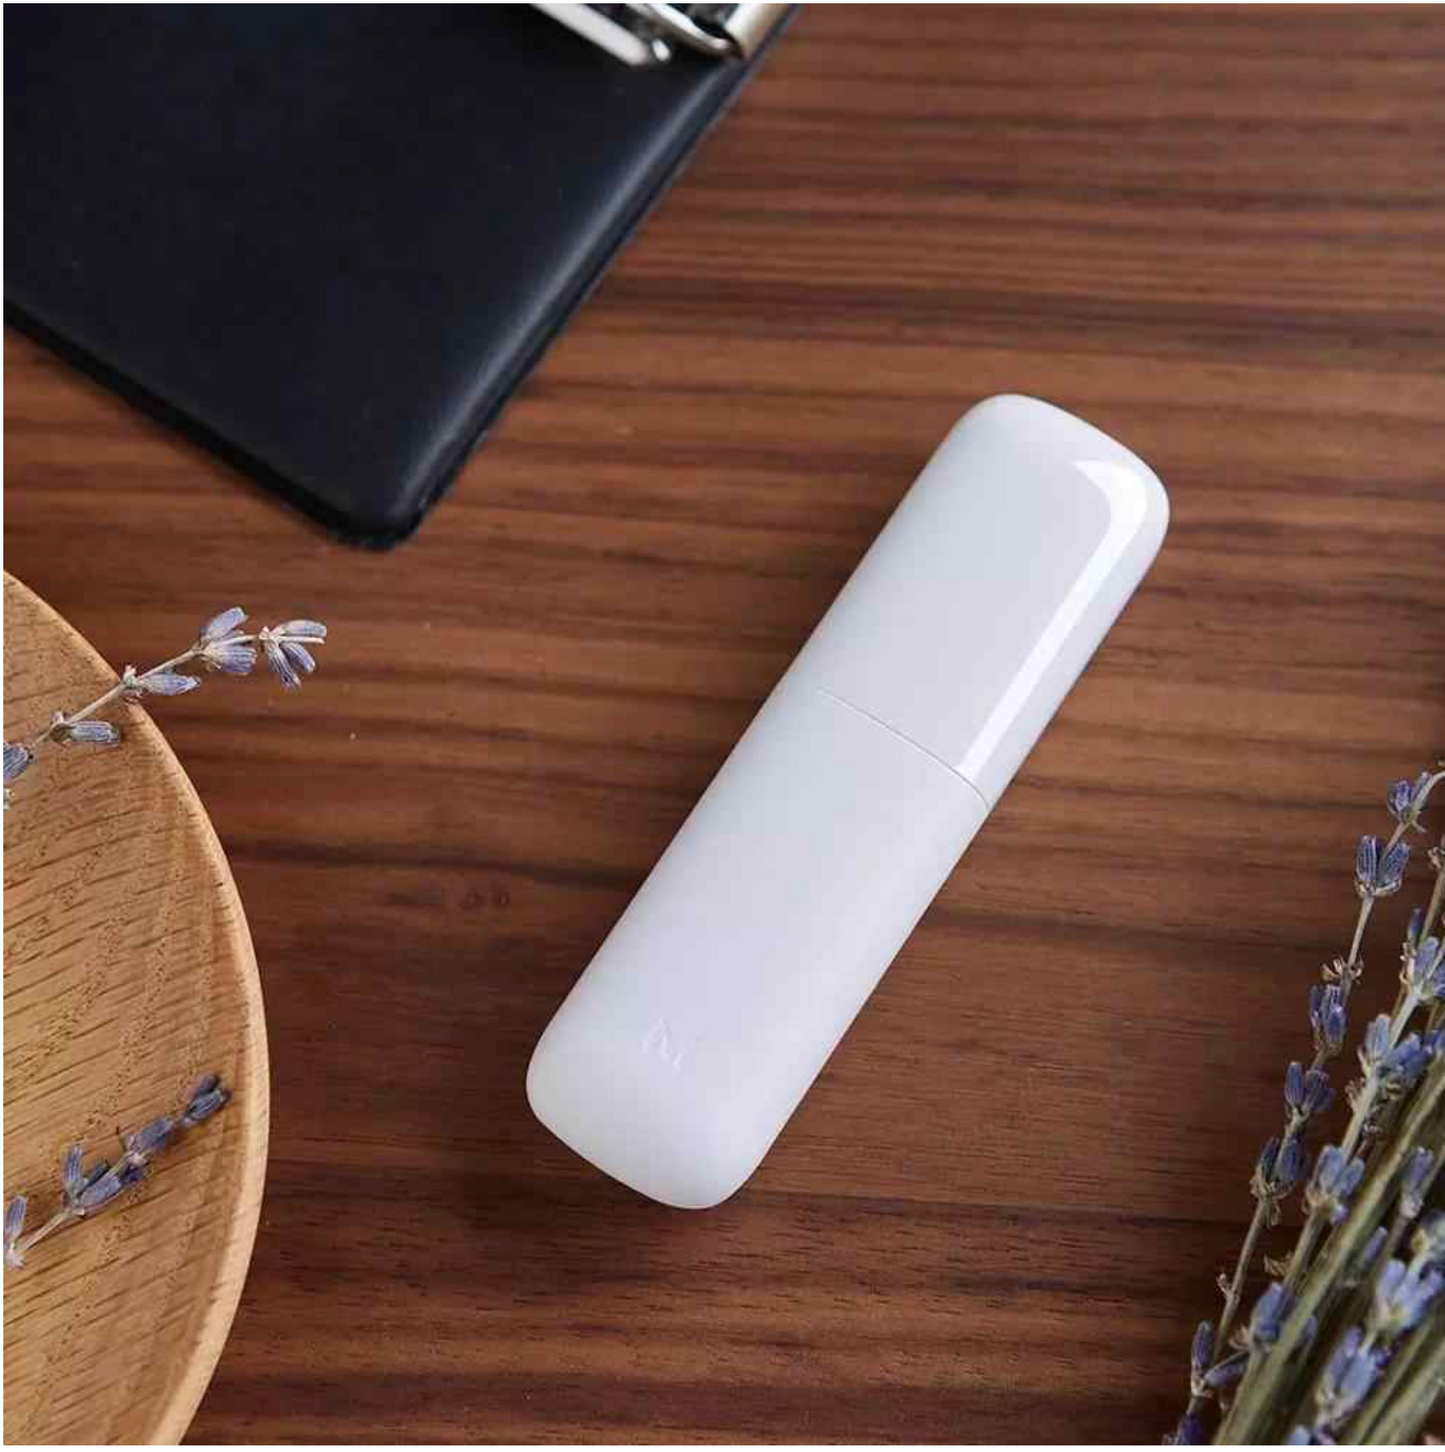 Physical mosquito repellent Eliminates Mosquito Itching Stick Baby Skin Protects Portable Safe Child Elderly